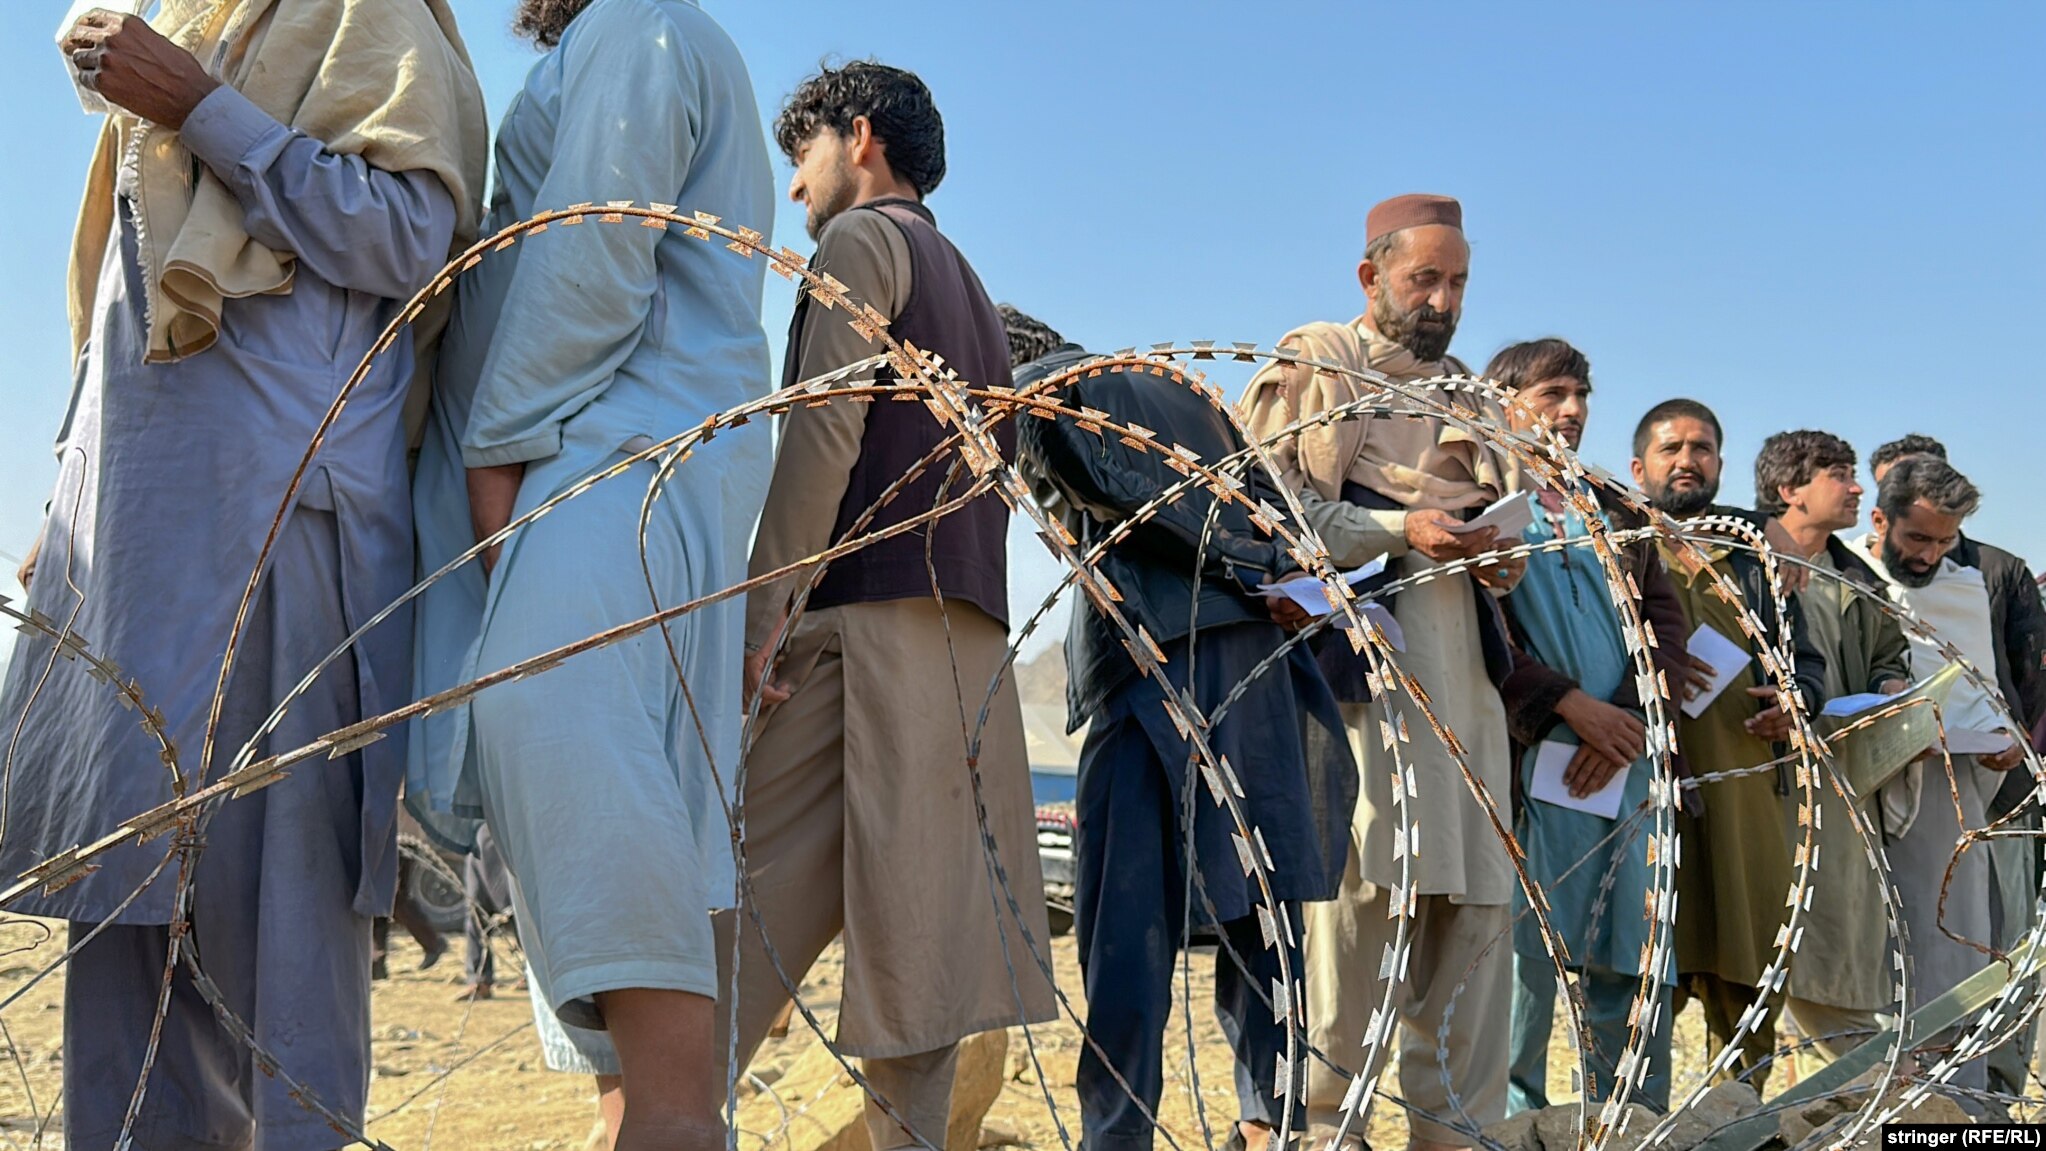 Afghans wait to be processed. The immediate need for many is to find housing ahead of the harsh winter months in Afghanistan, a mountainous country where temperatures can drop to as low as minus 35 degrees Celsius.